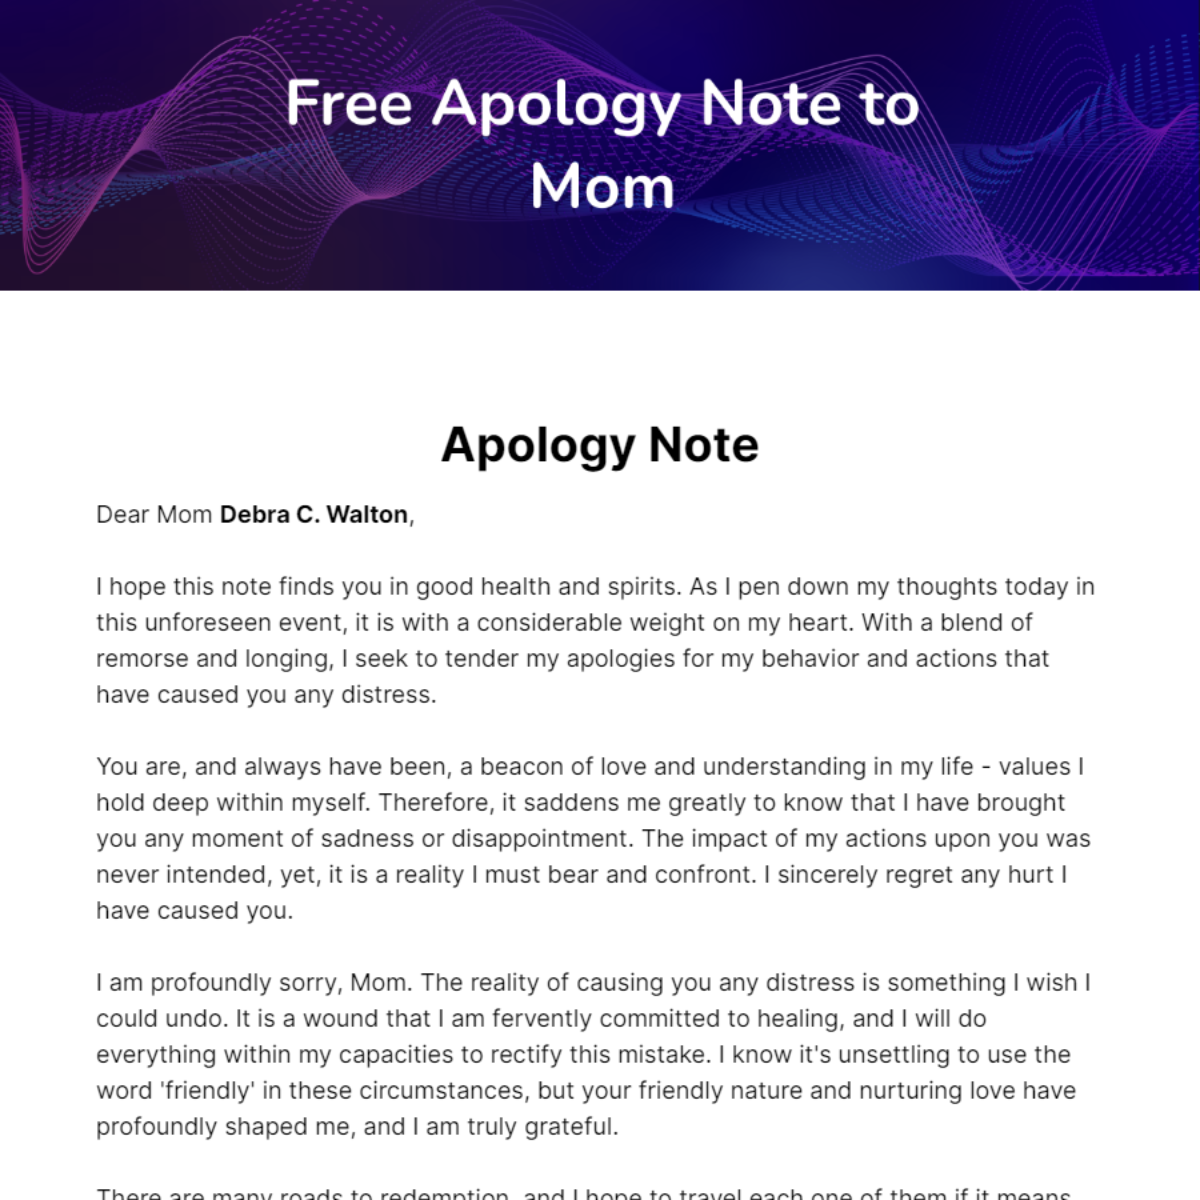 Apology Note to Mom Template - Edit Online & Download Example